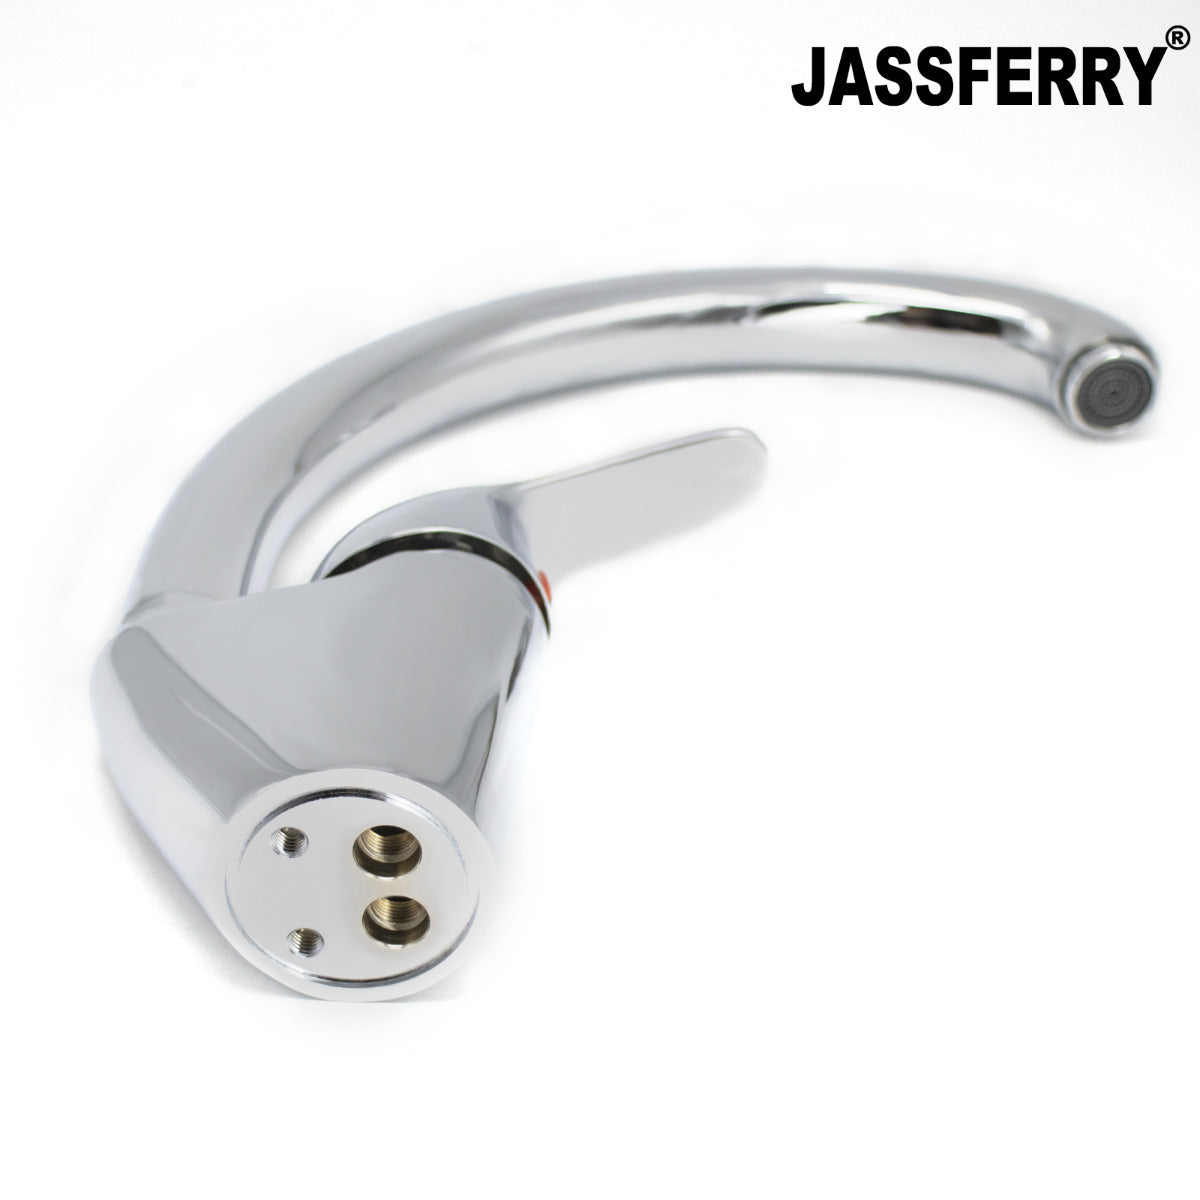 JassferryJASSFERRY Traditional Kitchen Sink Mixer Taps Waterfall Single Lever Hot and ColdKitchen Sinks